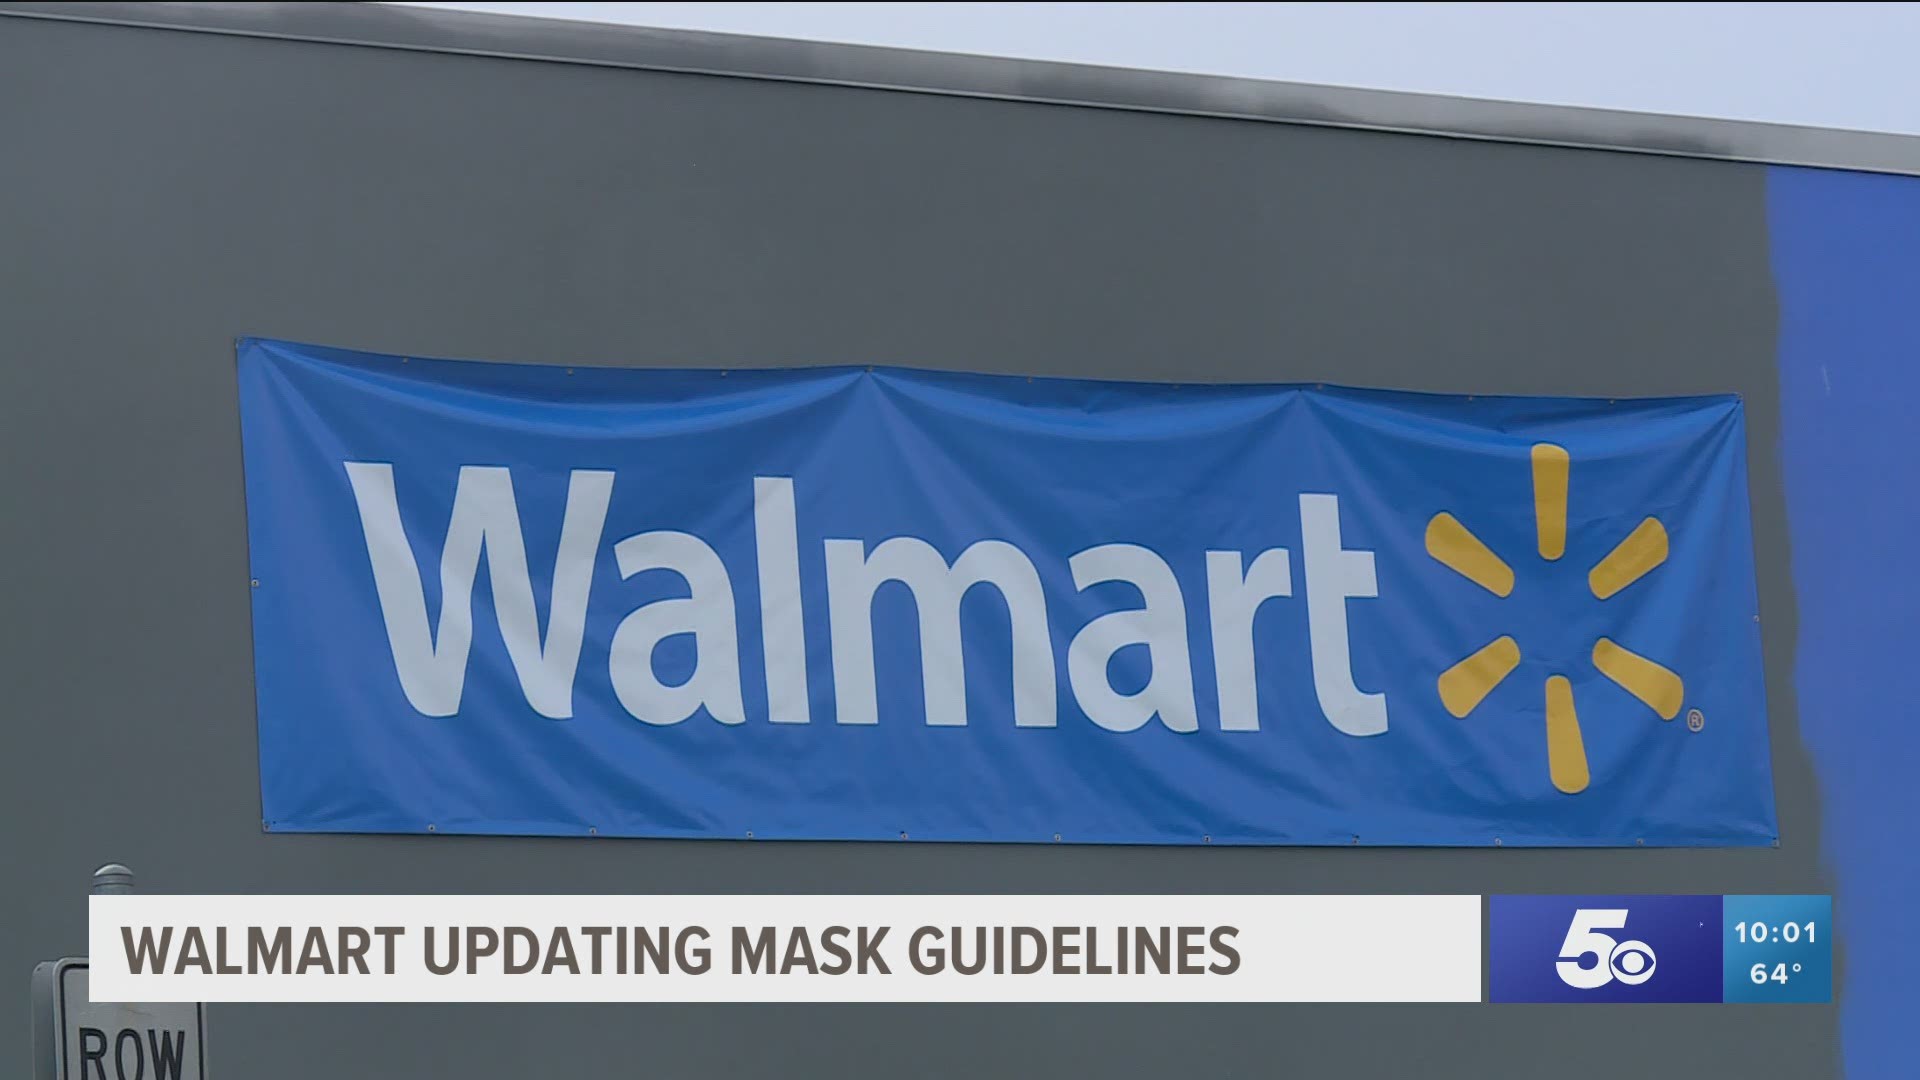 Walmart released their new guidance on masks and vaccinations today (May 14) following yesterday's guidance from the CDC.